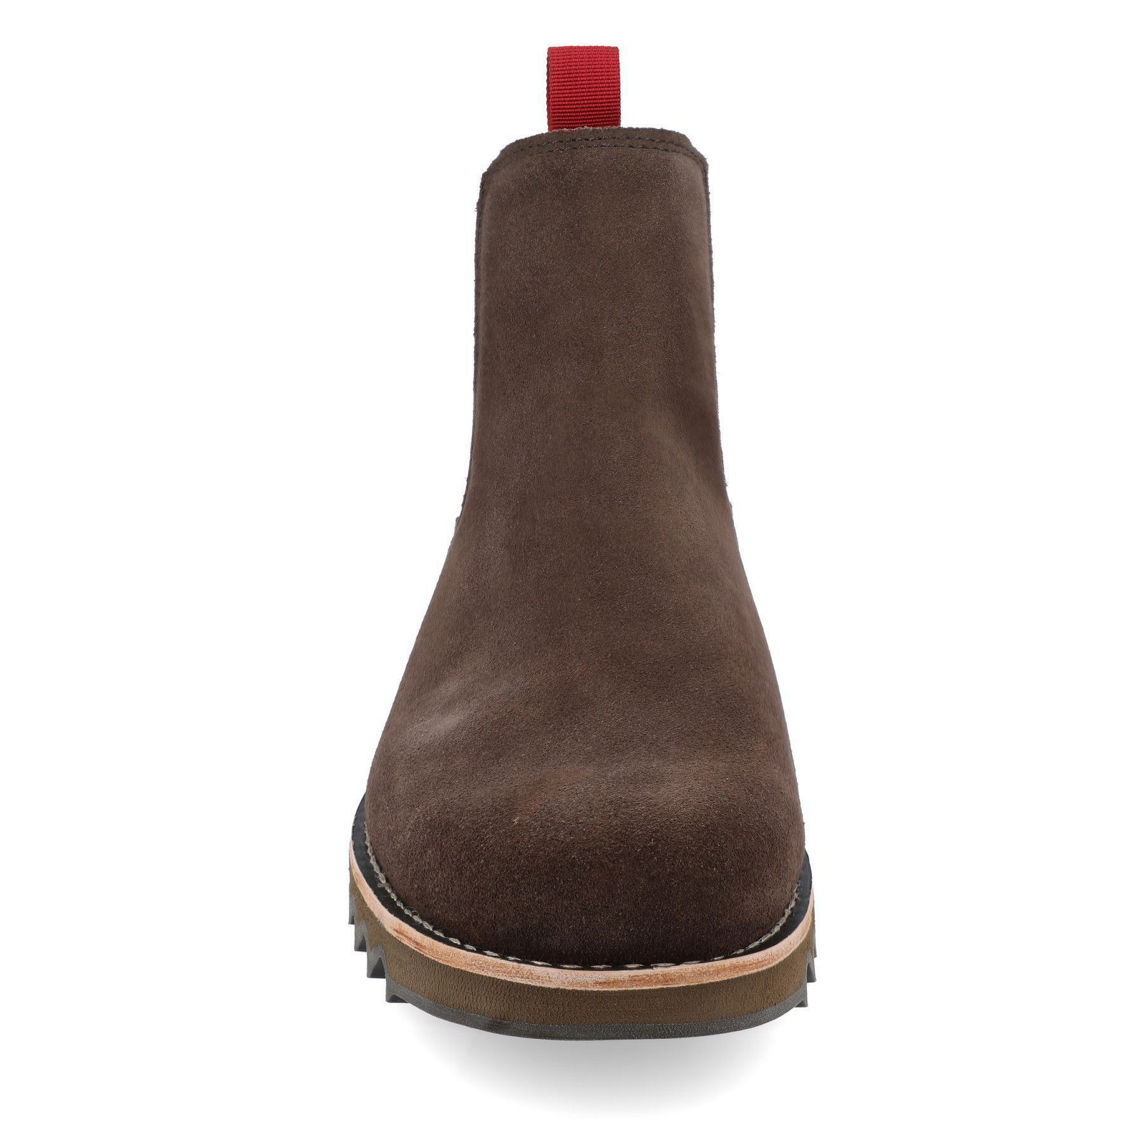 Territory Yellowstone Water Resistant Chelsea Boot - Image 2 of 5